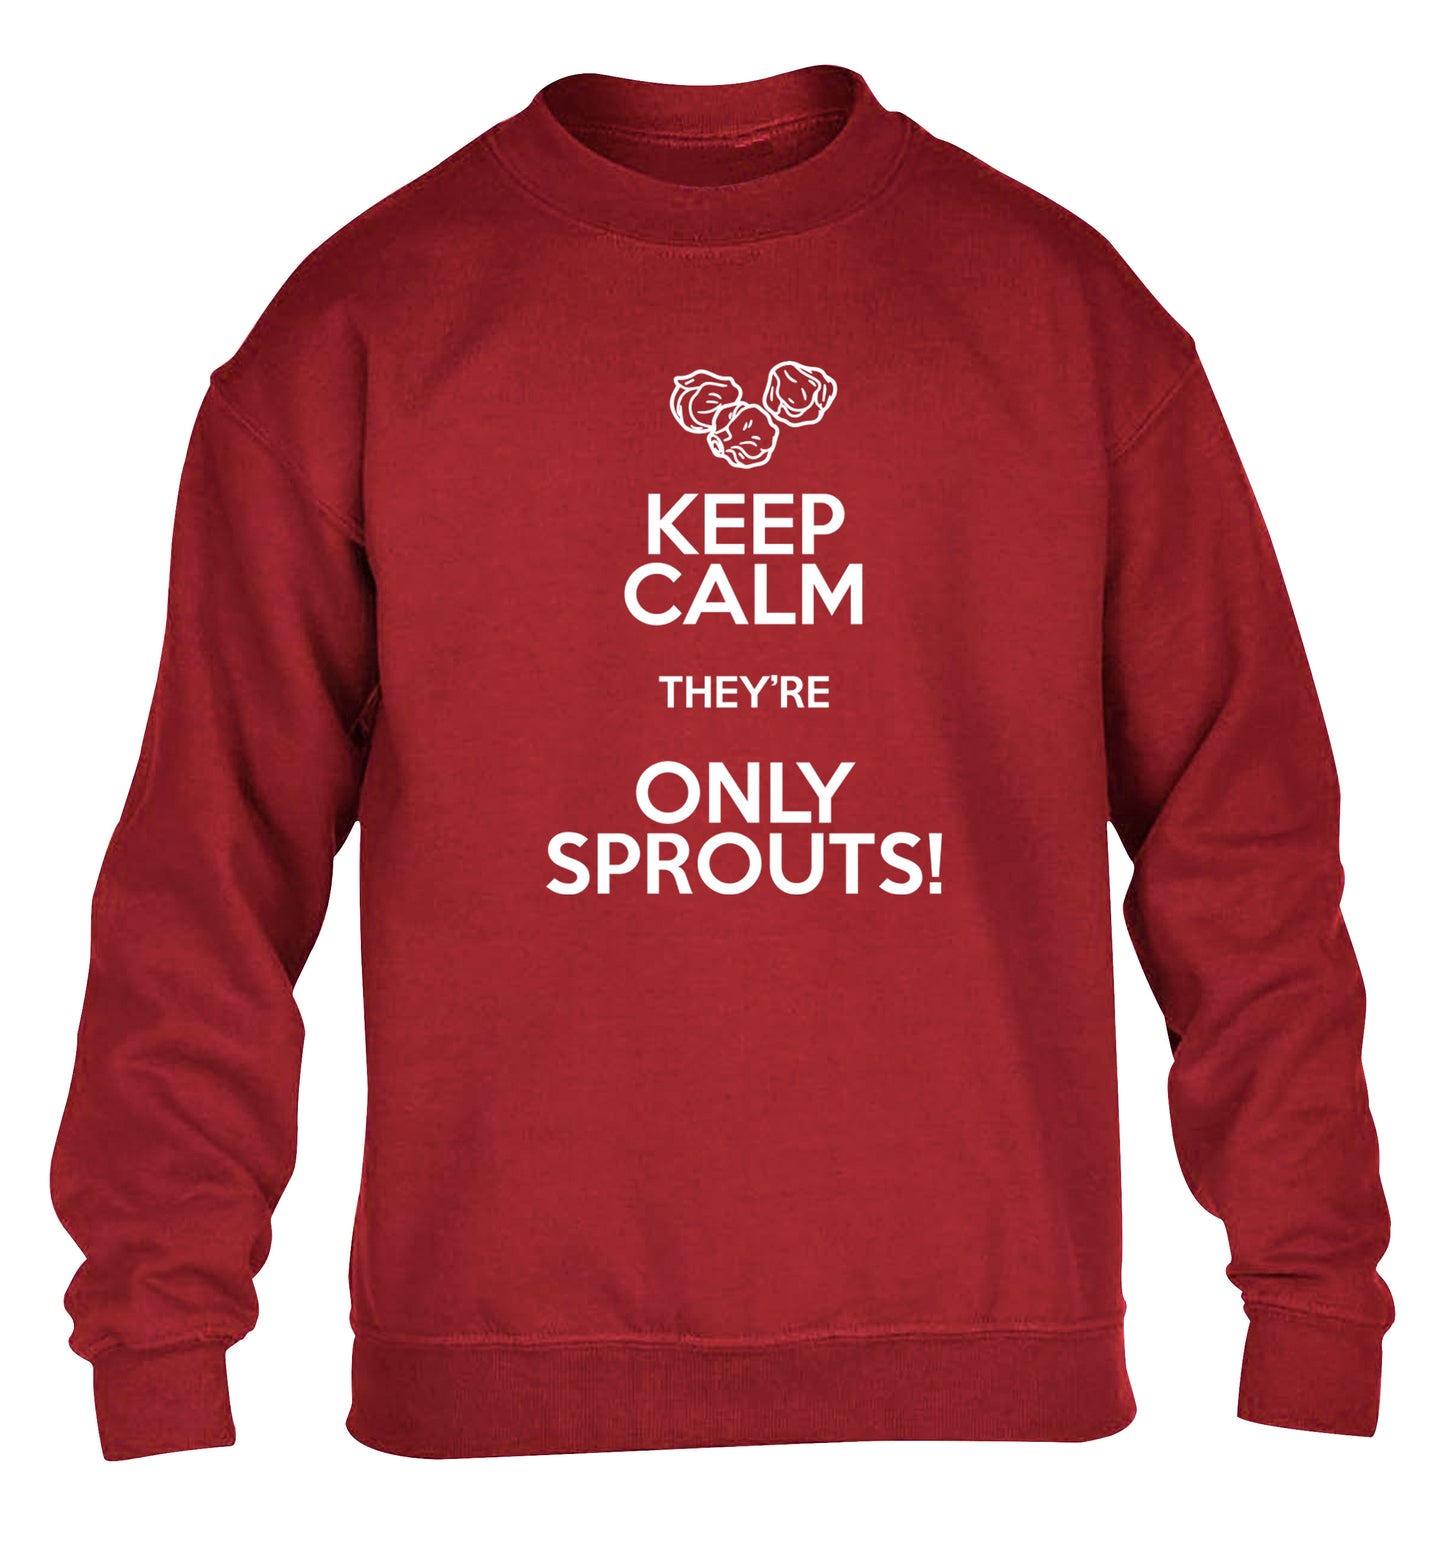 Keep calm they're only sprouts children's grey sweater 12-13 Years